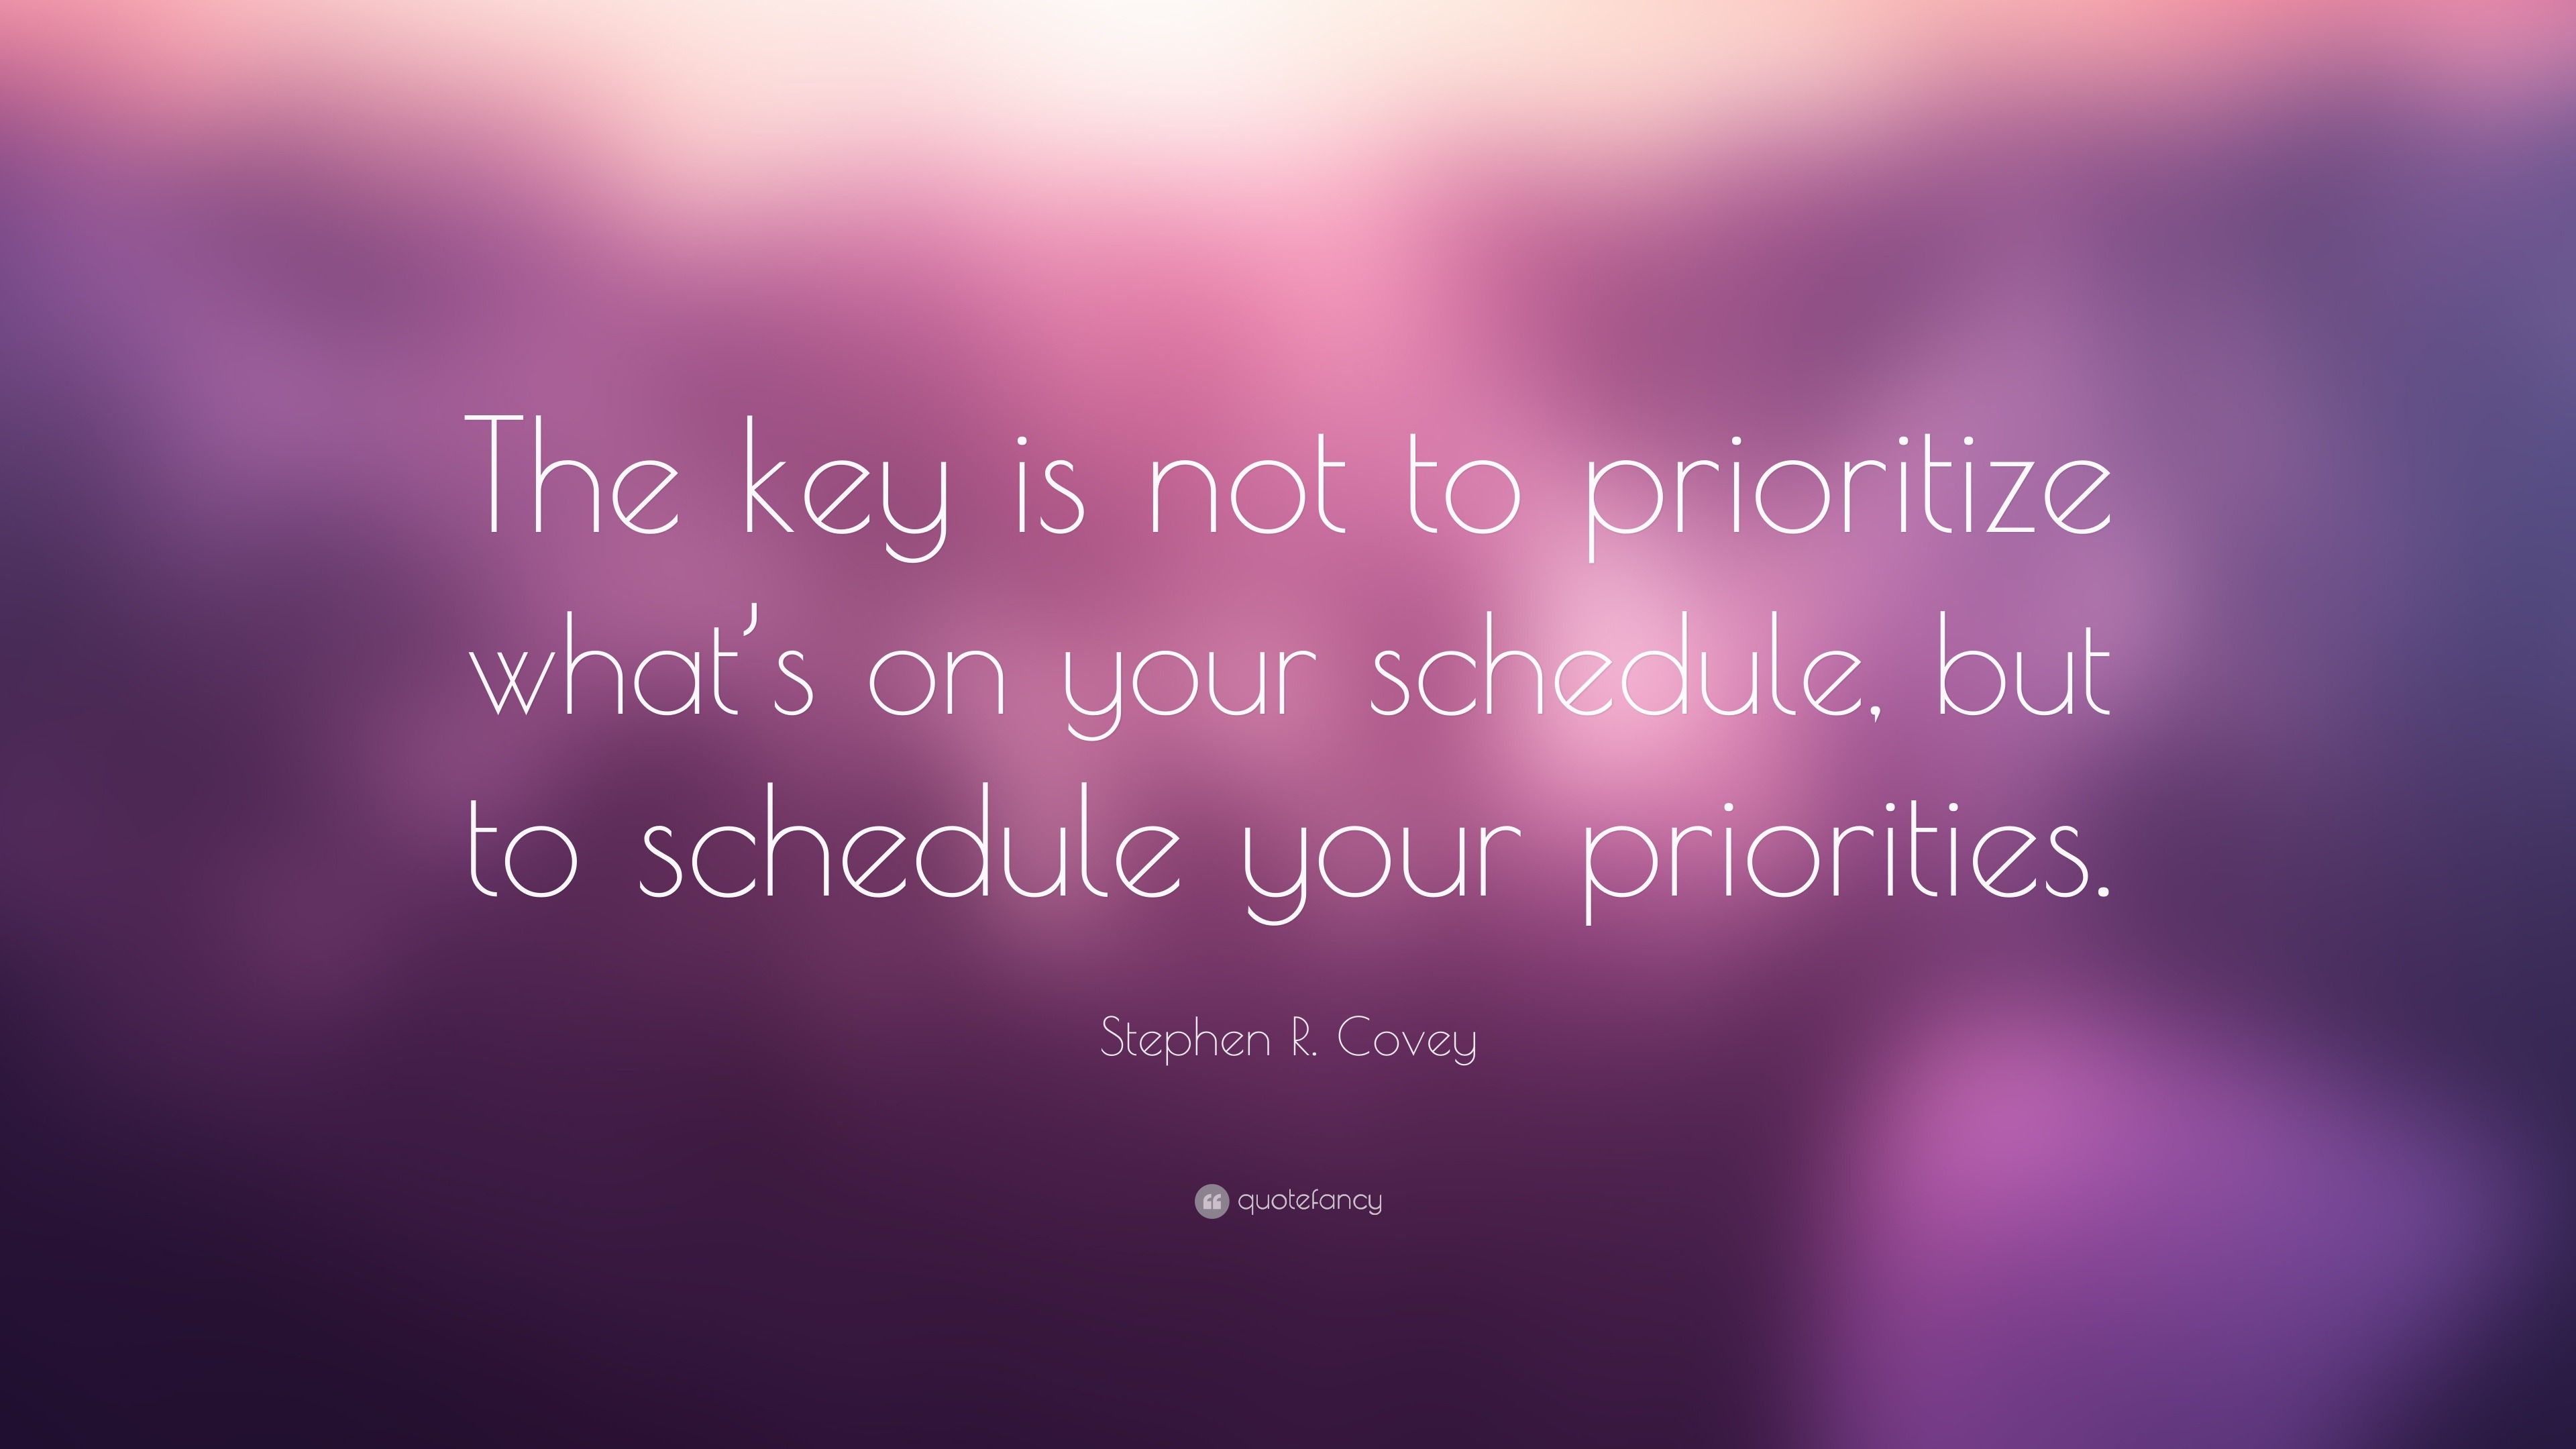 Stephen R. Covey Quote: “The key is not to prioritize what’s on your